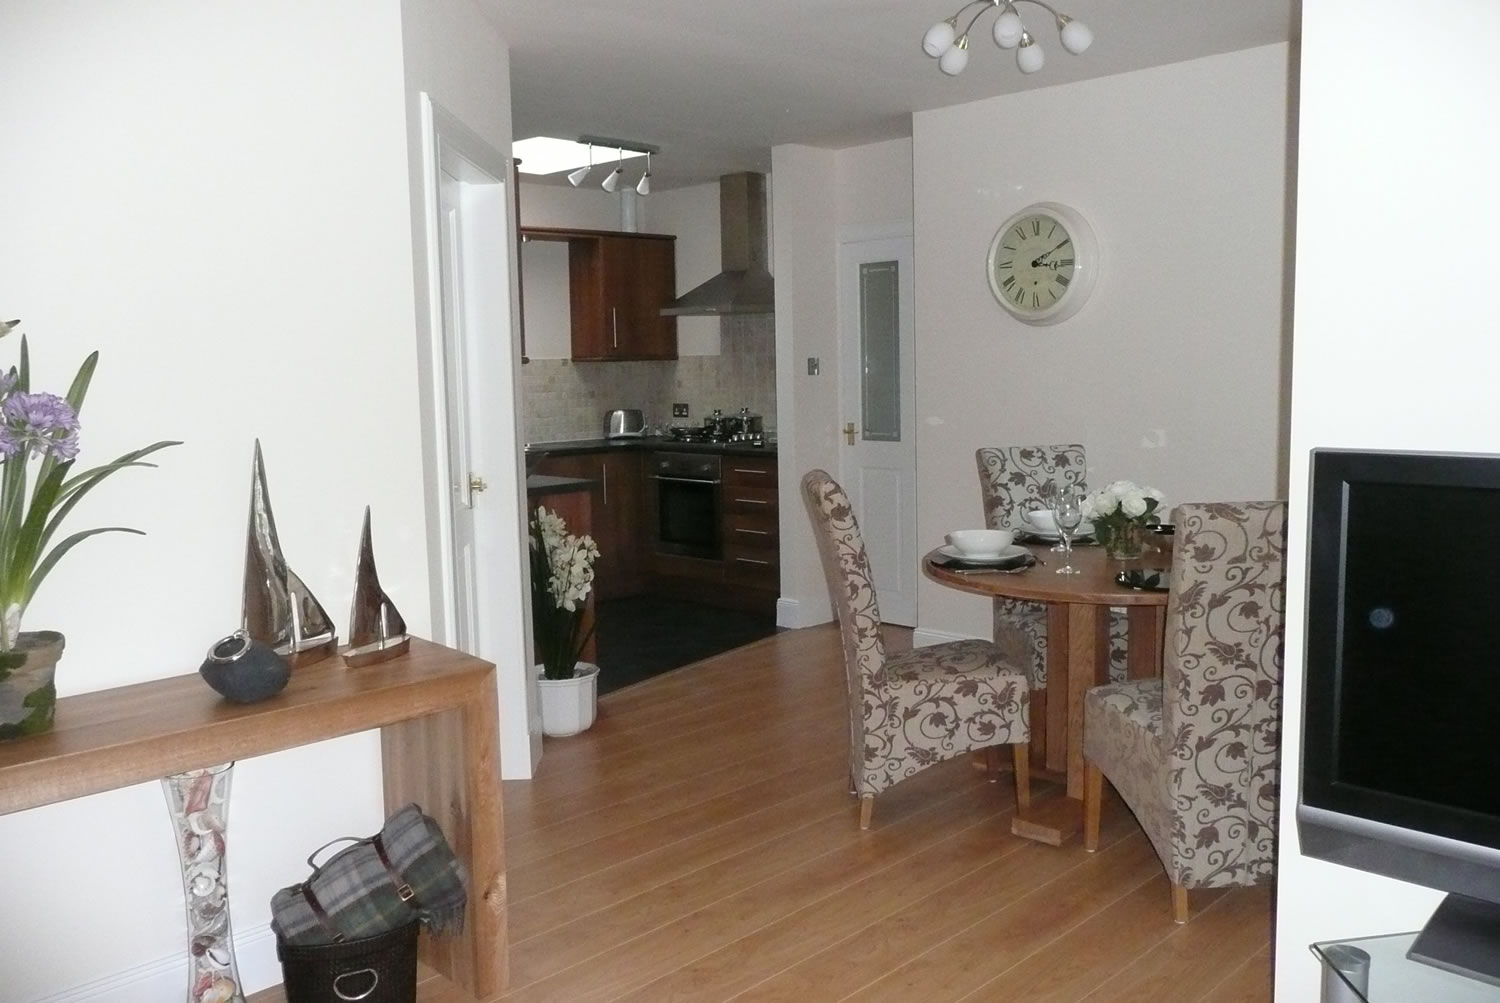 Self catering holiday let near st andrews